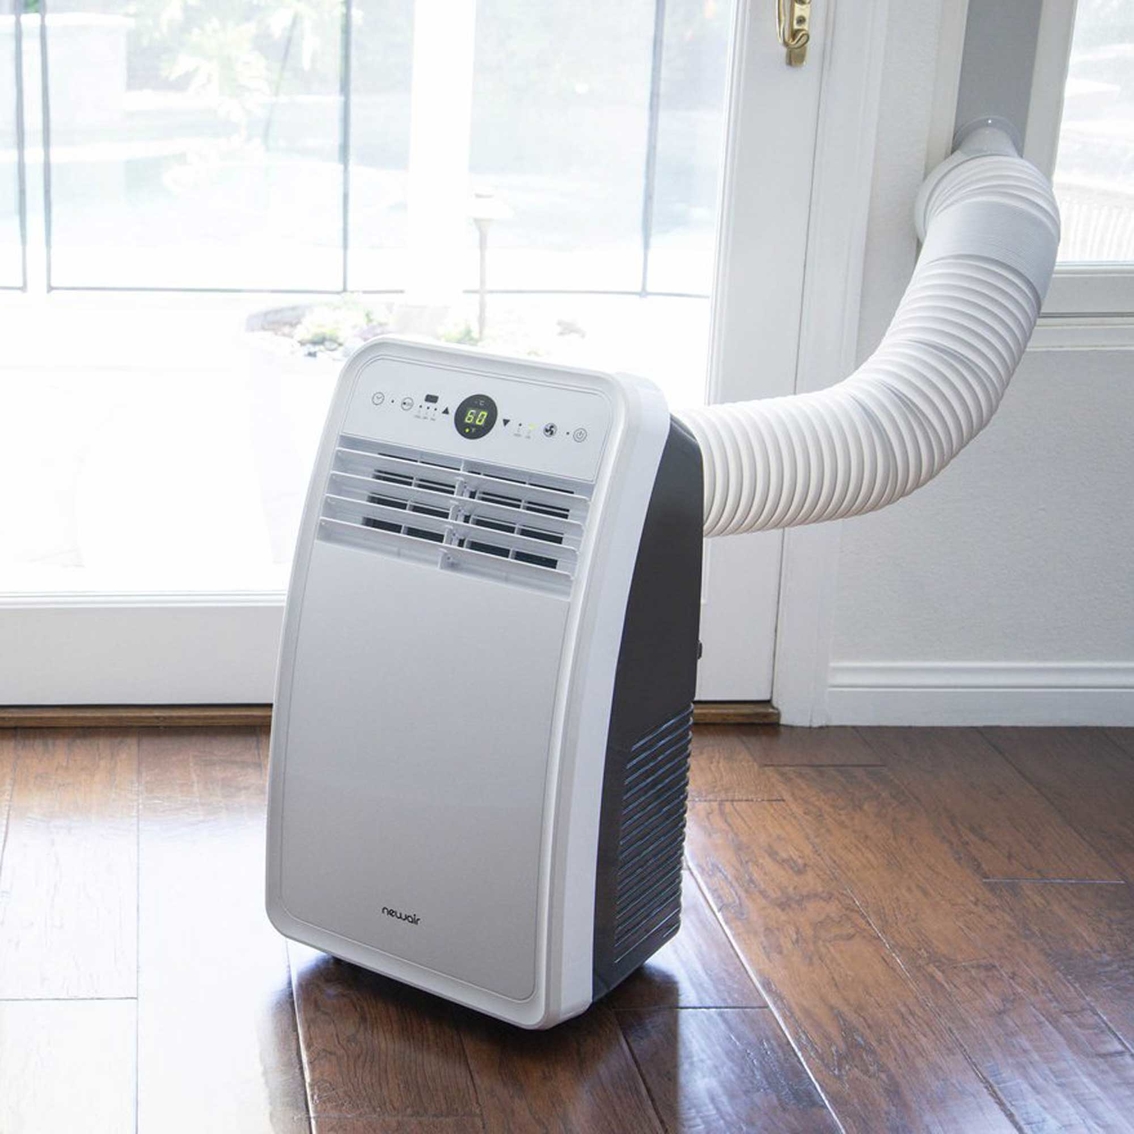 NewAir Compact 8,000 BTU Portable Air Conditioner - Image 10 of 10